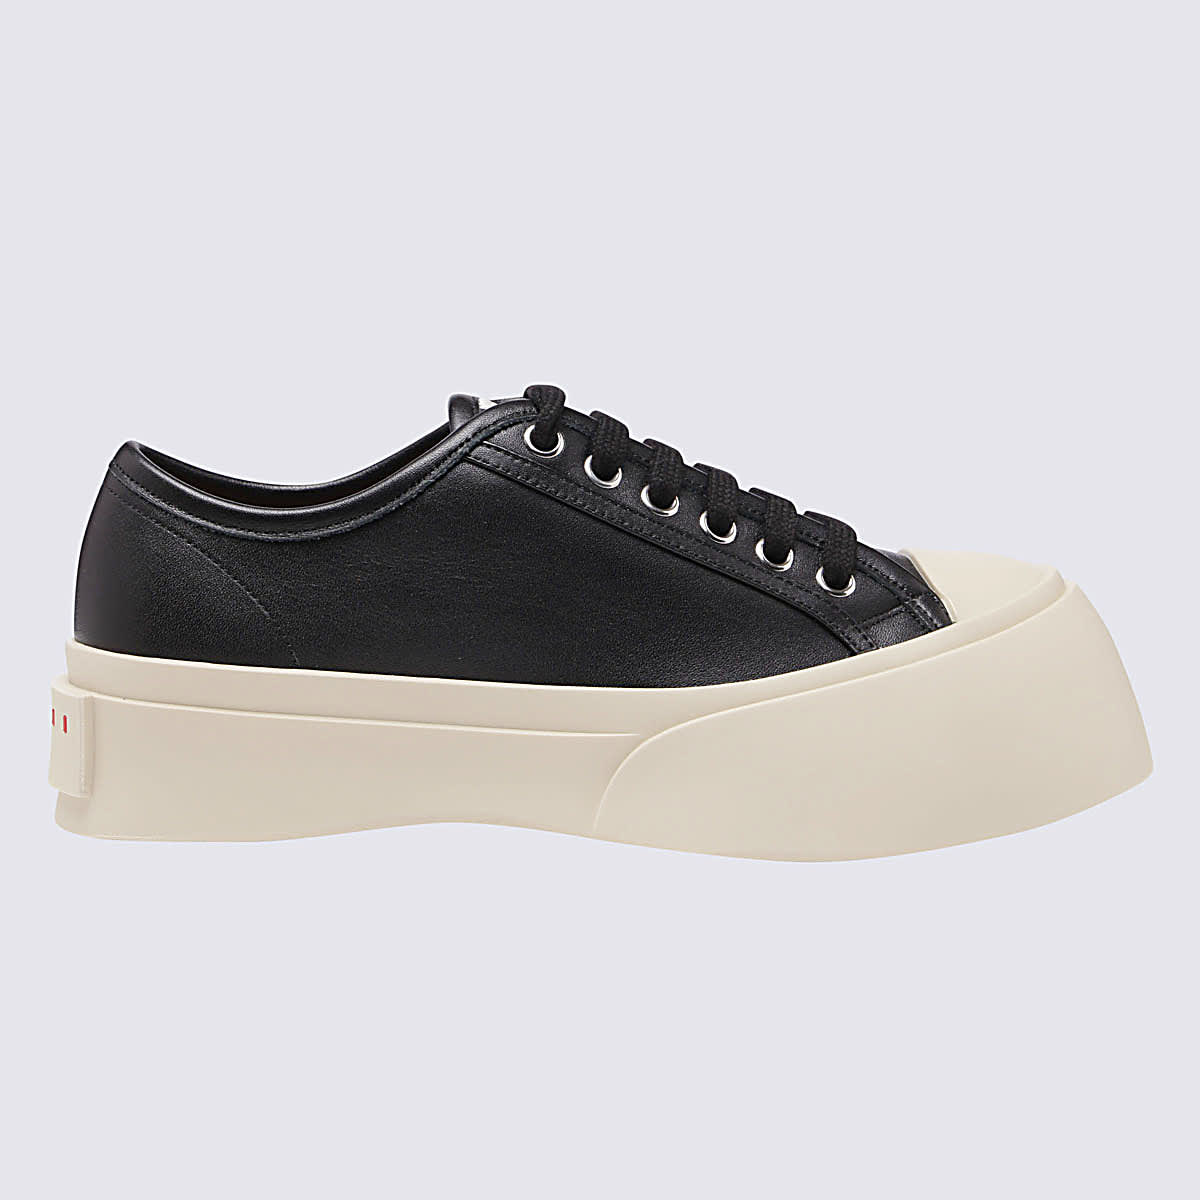 MARNI BLACK AND WHITE LEATHER PABLO SNEAKERS